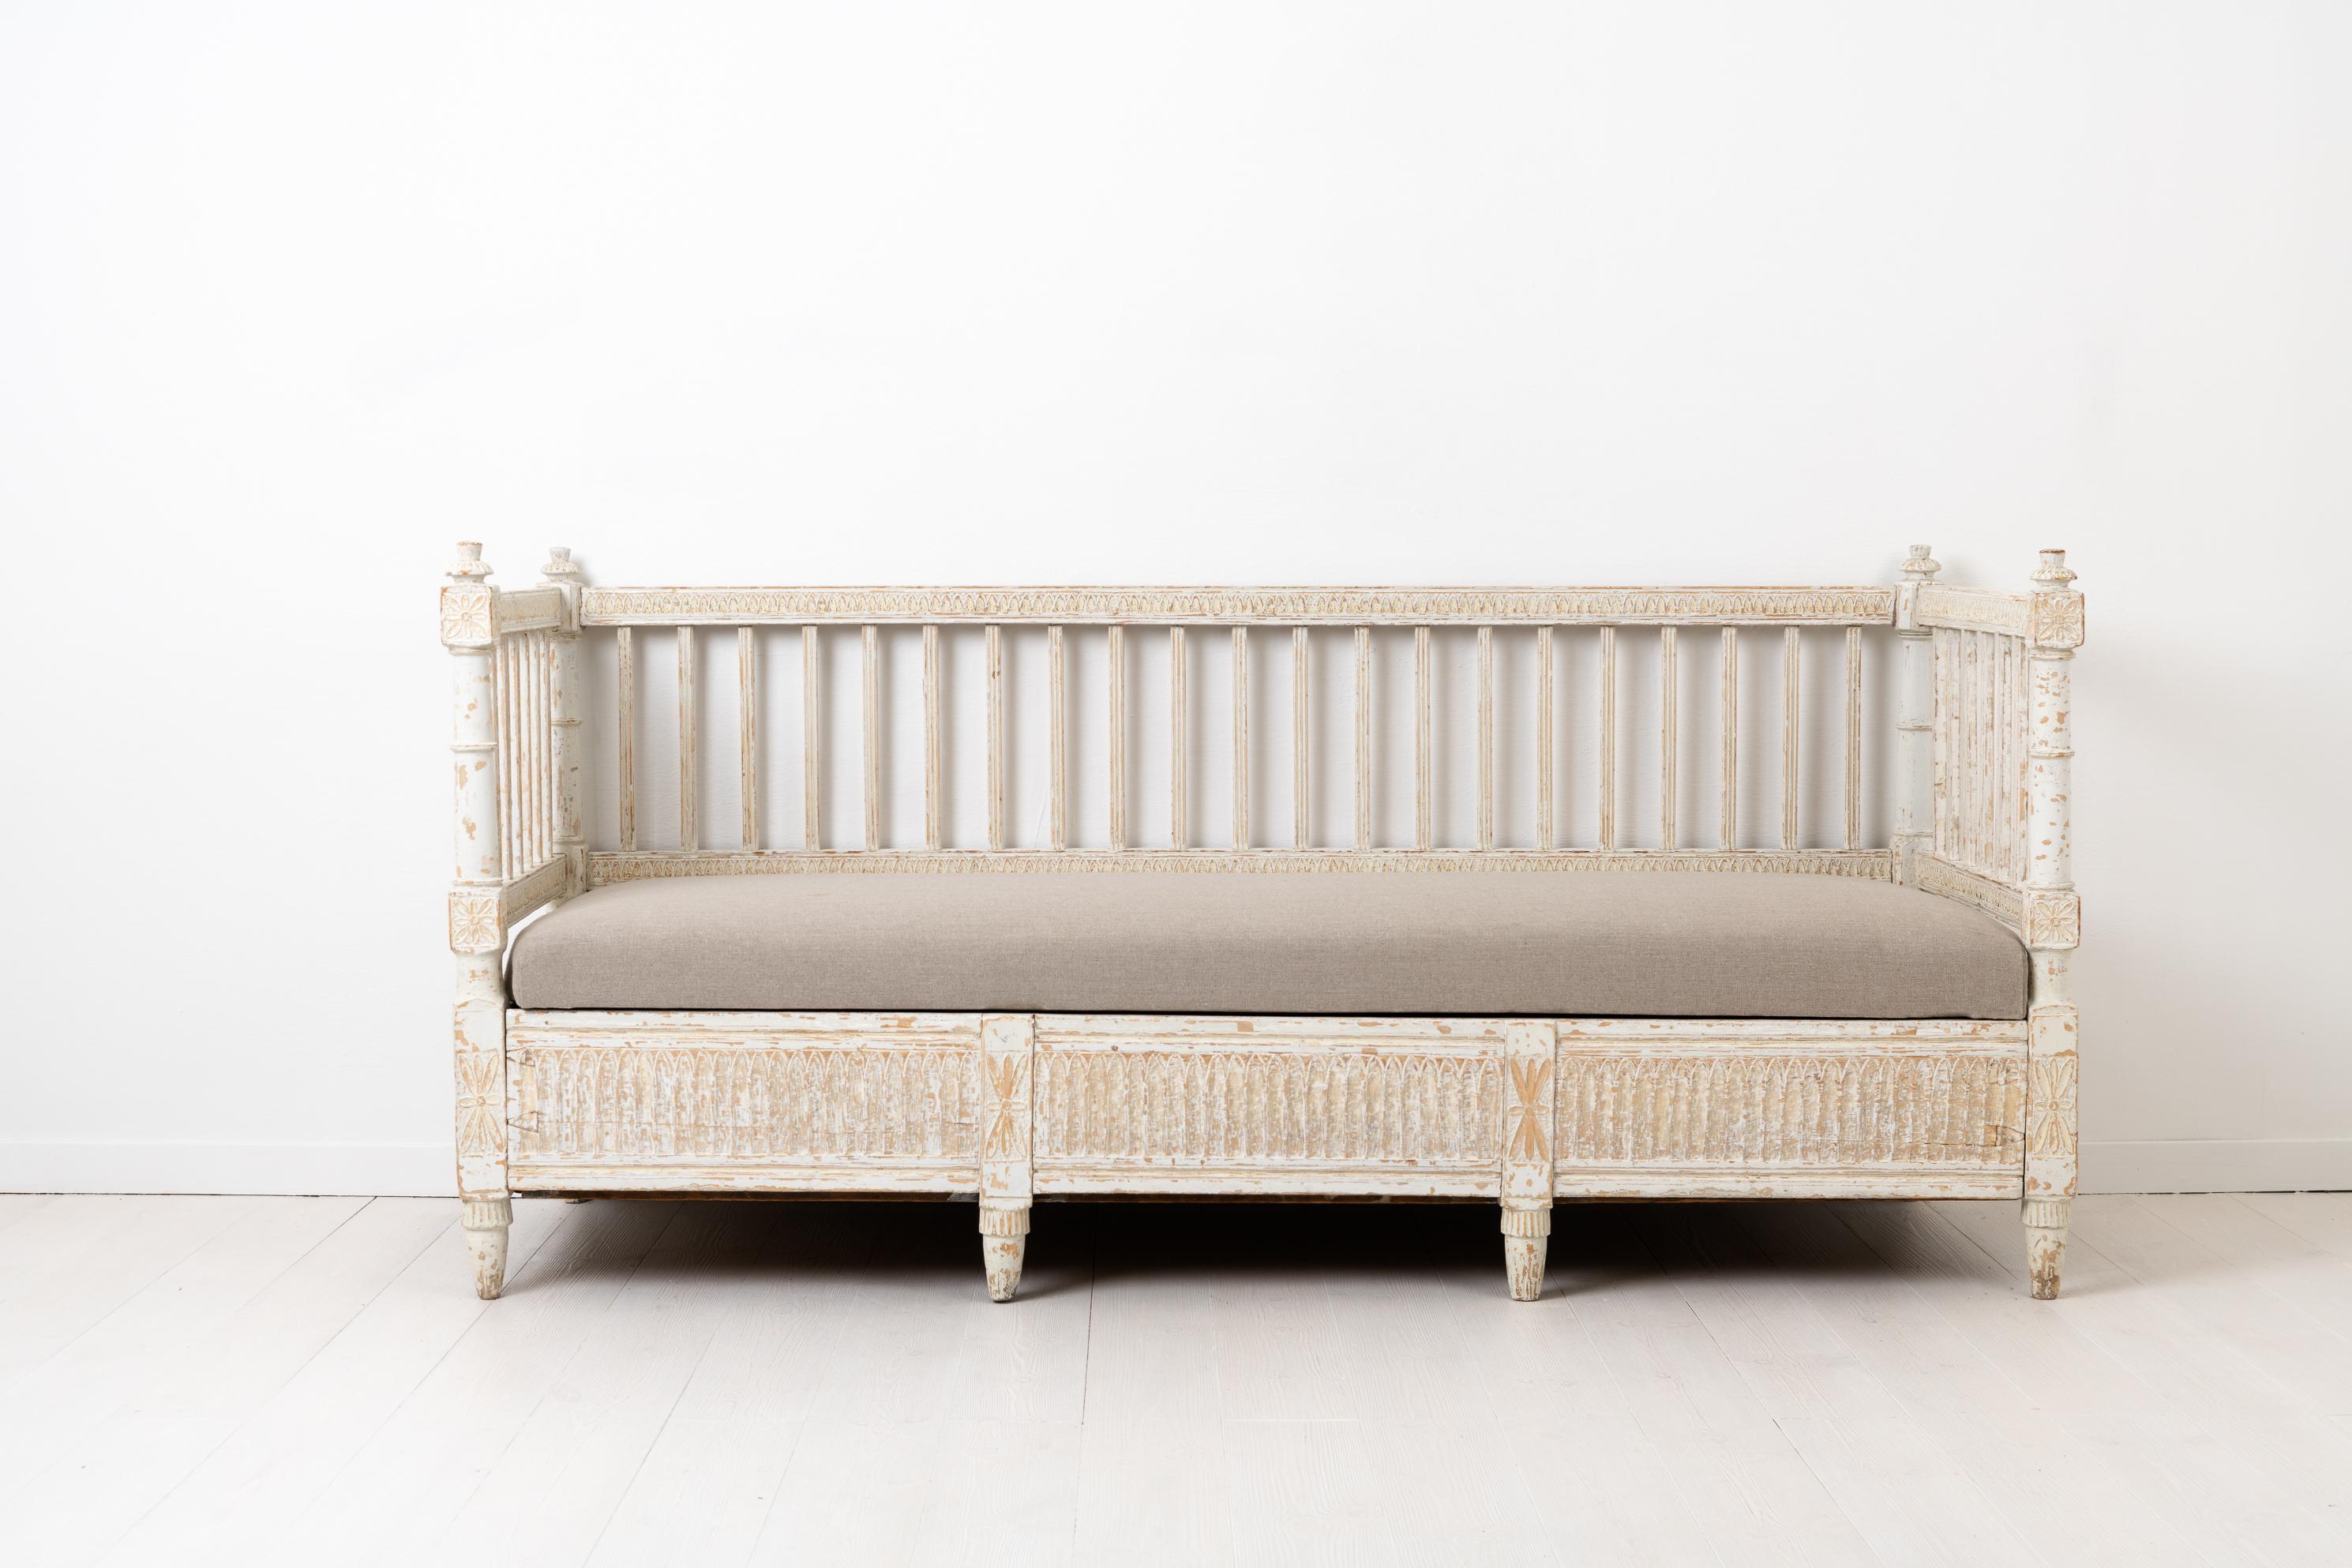 Swedish white 18th century Gustavian sofa made circa 1790-1800. The sofa is pine and richly decorated with wooden decorations carved by hand in the typical Gustavian / neoclassical style. The white paint is old paint from the late 1800s which has